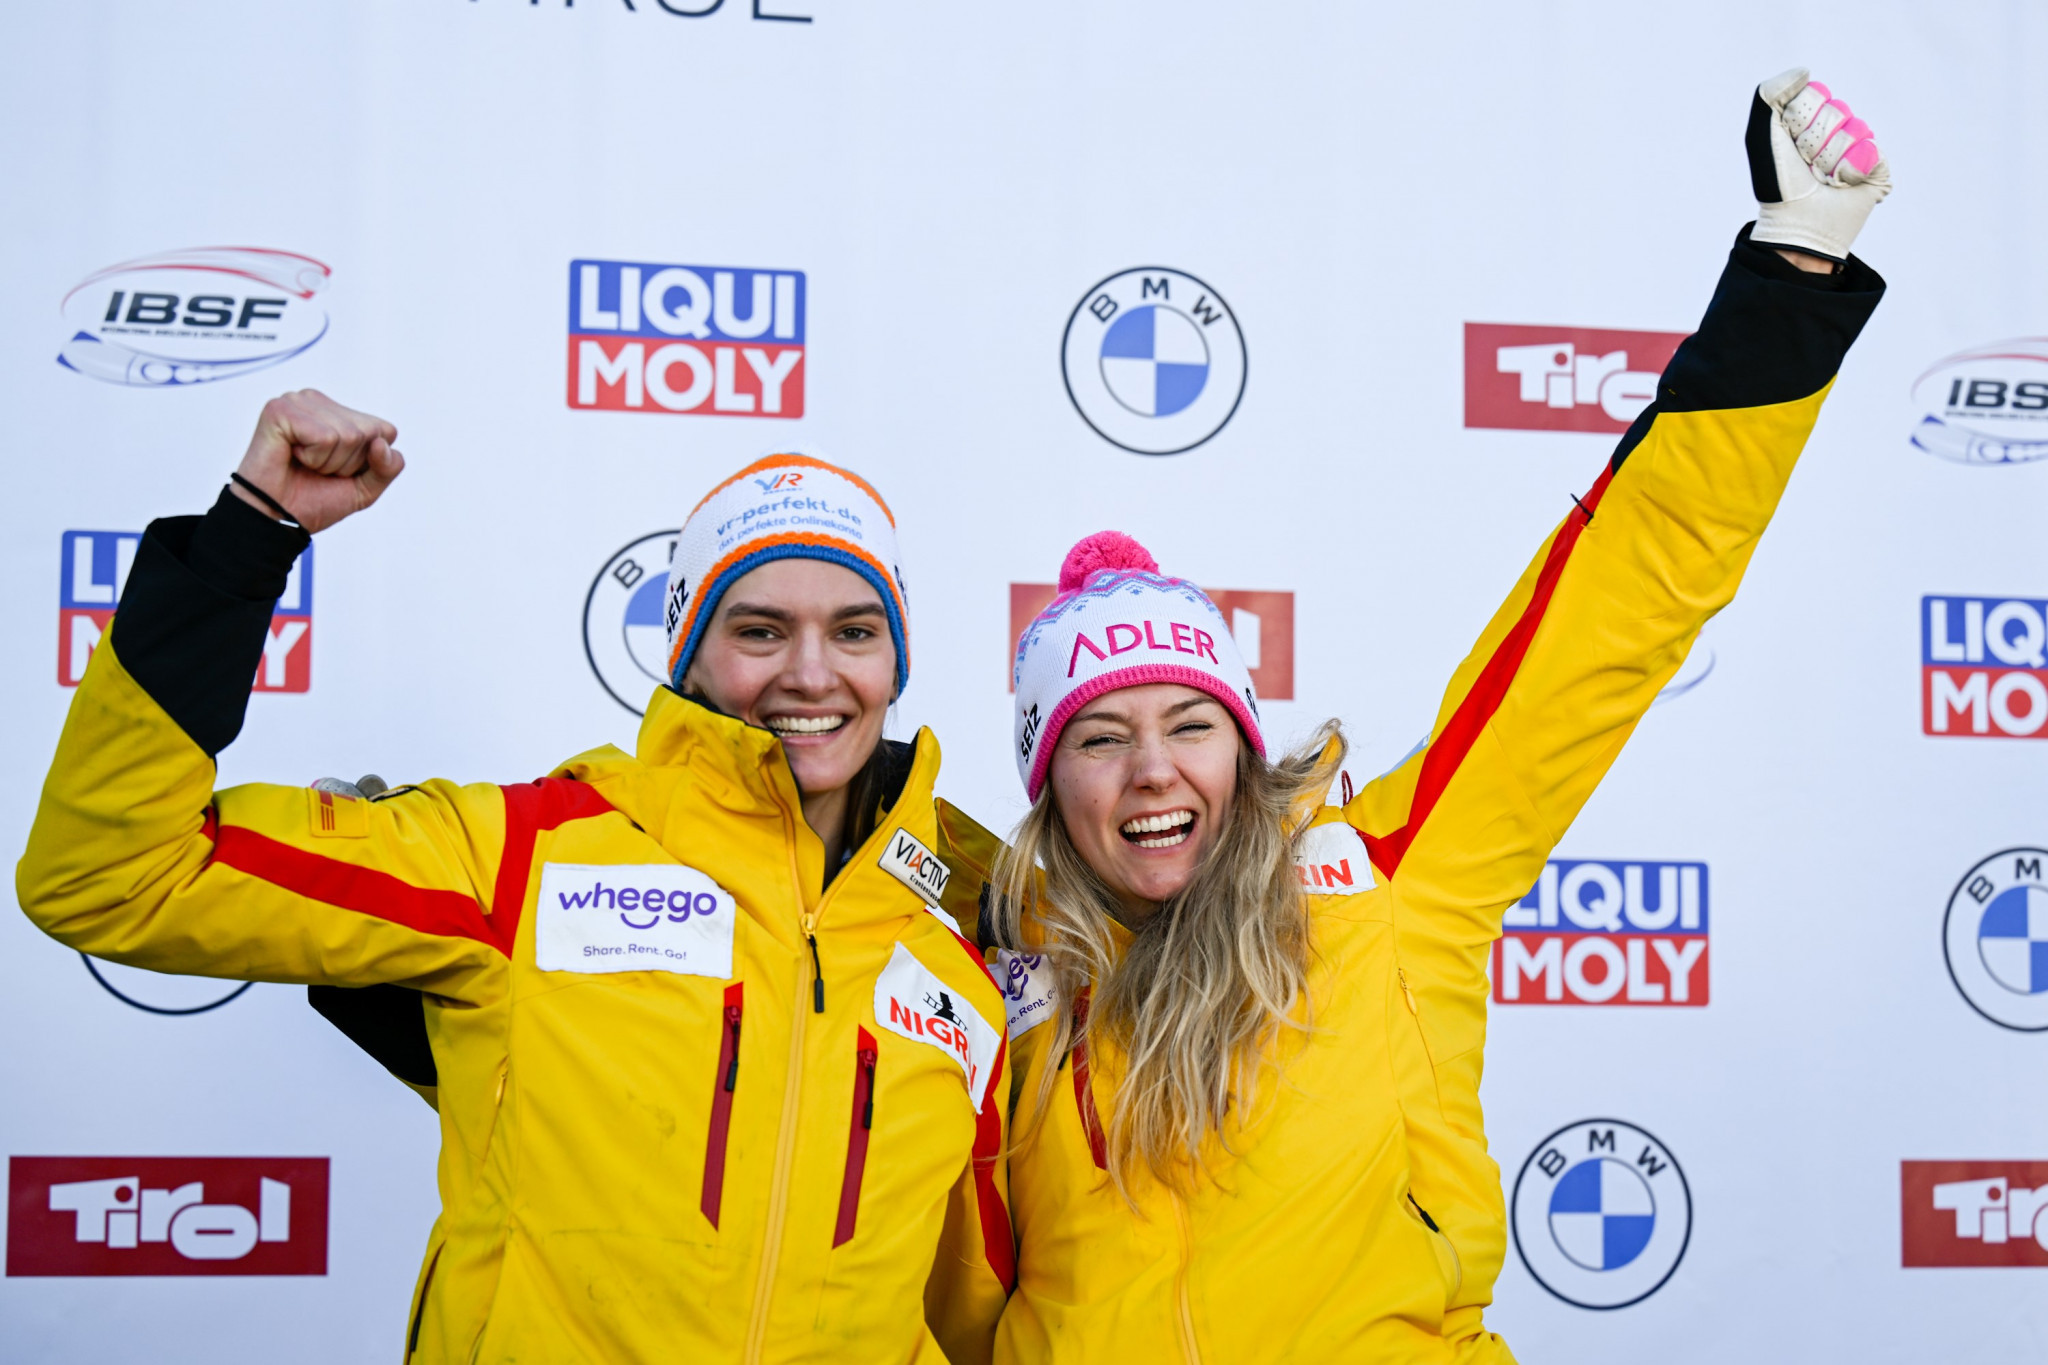 Laura Nolte, left, celebrates with push athlete Neele Schuten following their victory in Innsbruck ©IBSF